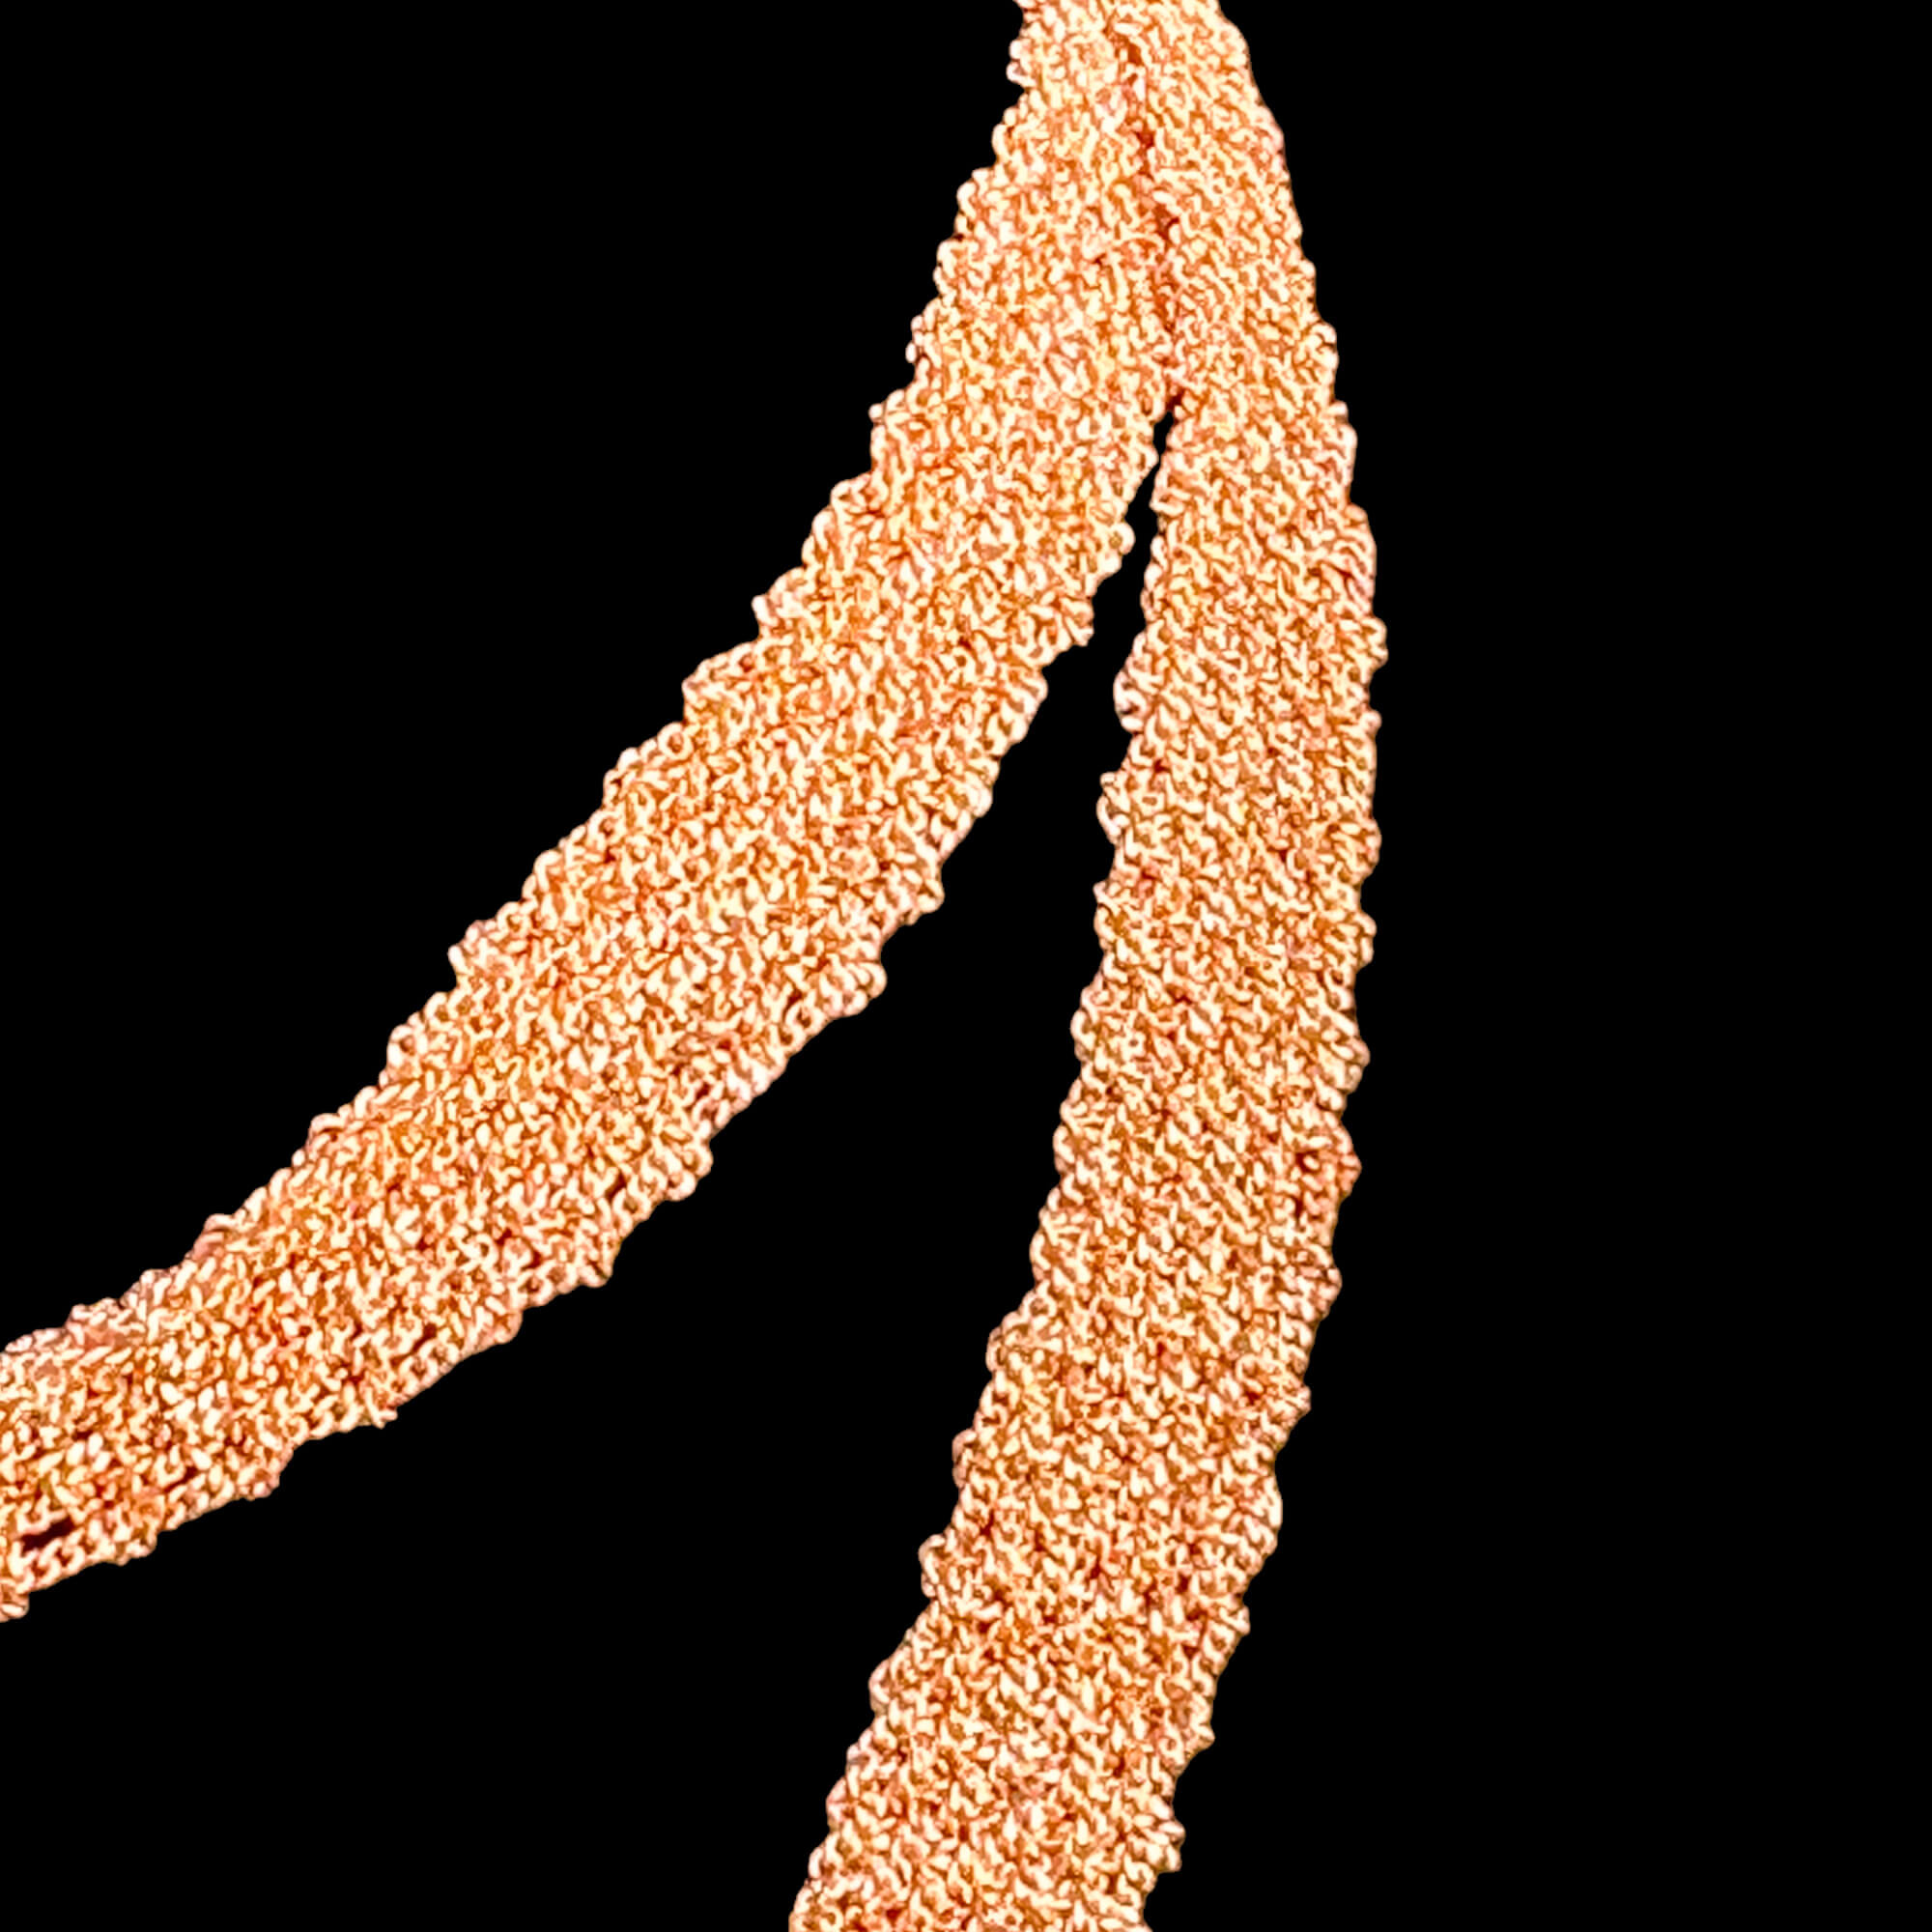 Rosé scarf made of interwoven chains